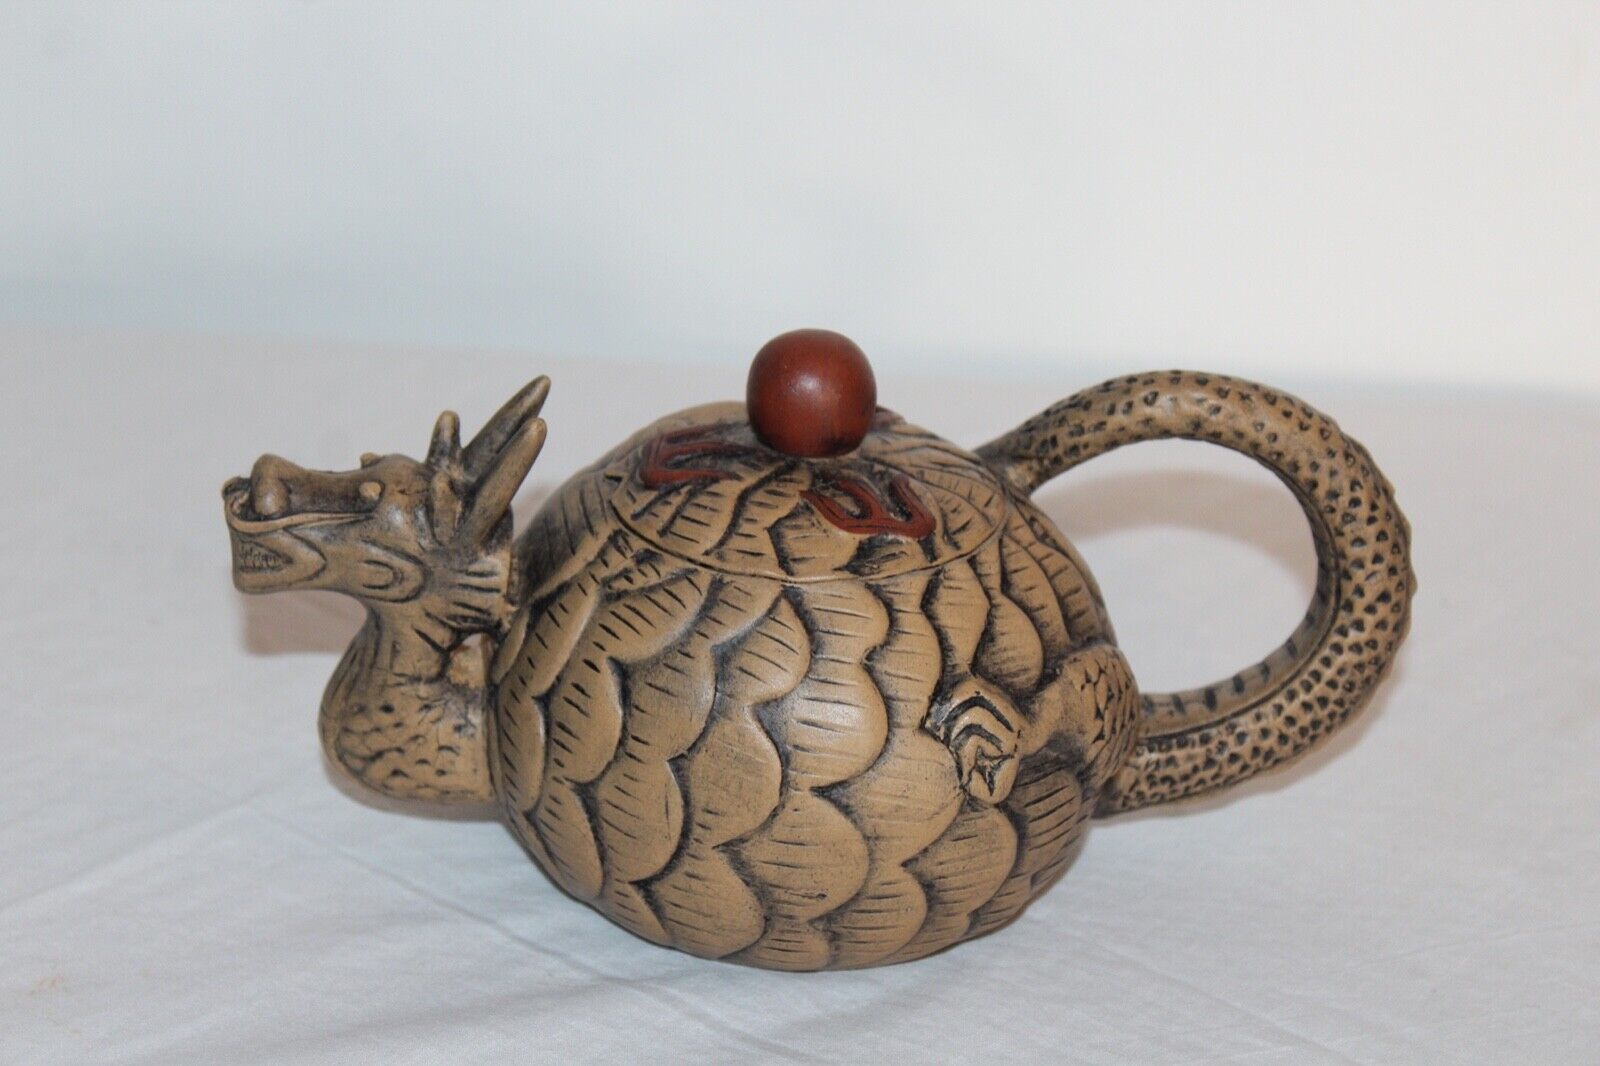 Chinese Pottery Dragon Teapot Scale Designs Signed Symbols Dragon Teapot